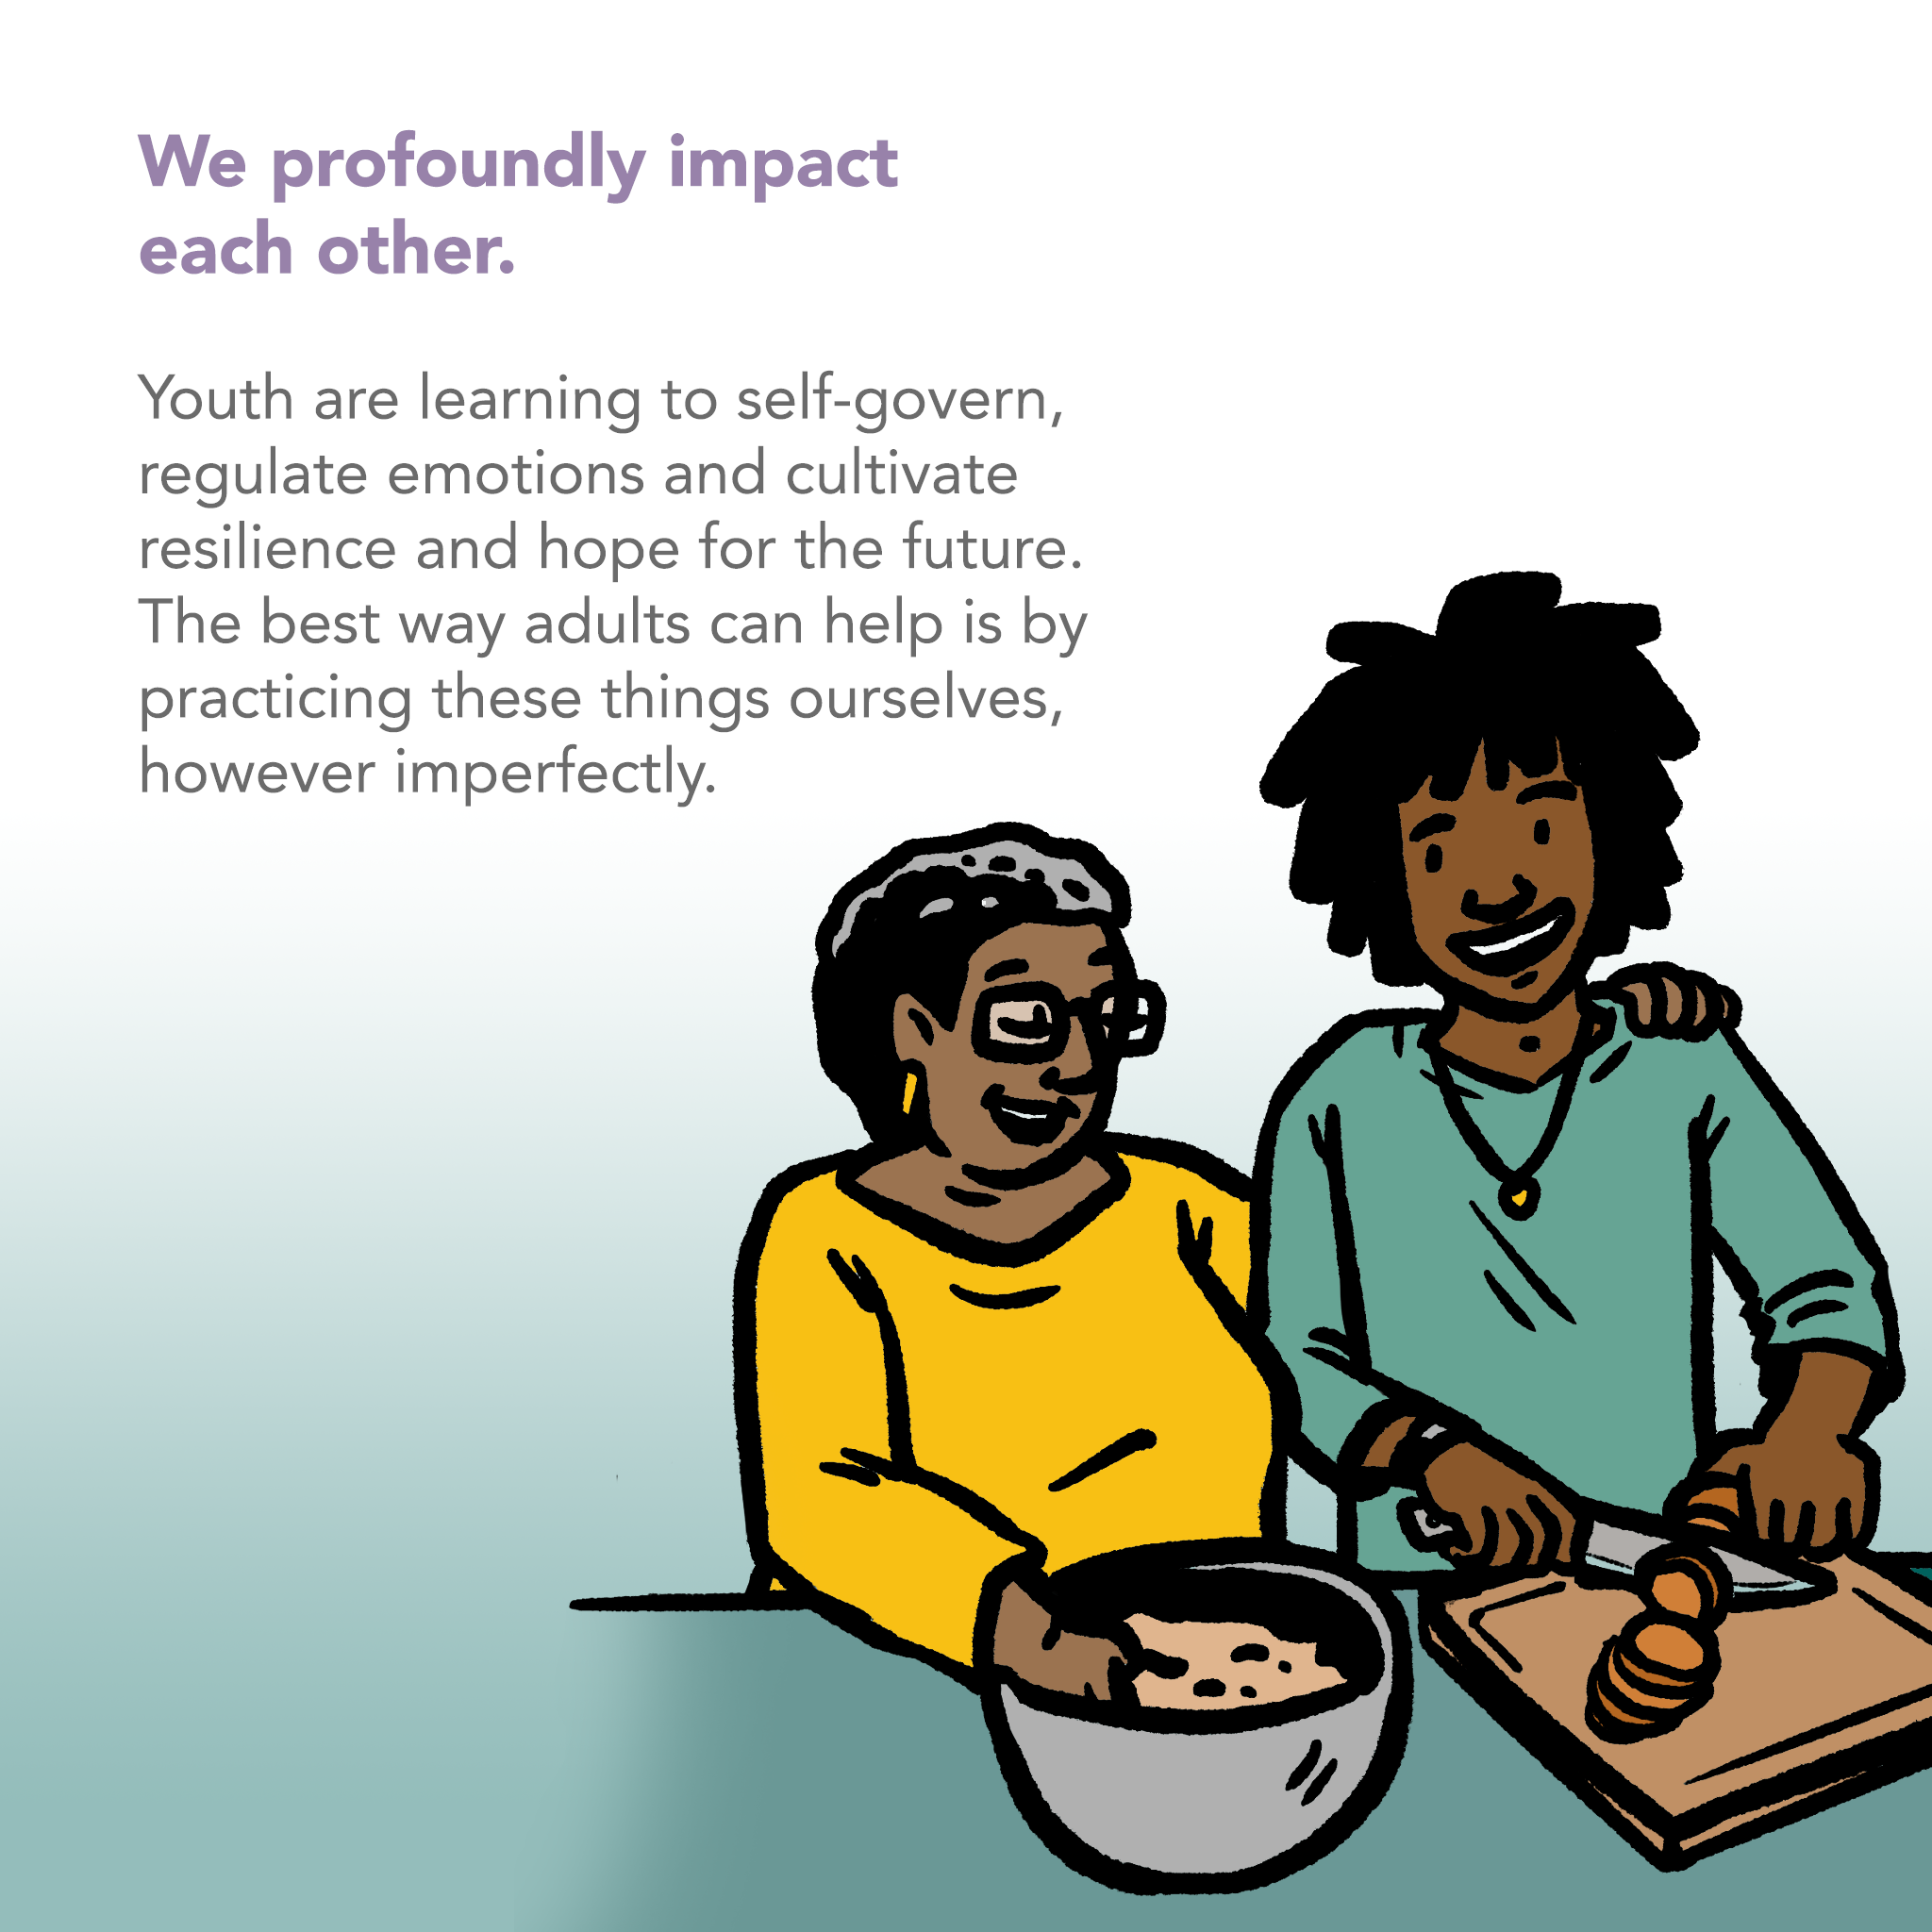 Image of an adult and a youth side by side, preparing a meal. The young person is chopping vegetables. The adult is mixing food in a bowl with one hand and has their other arm around the youth's shoulder. Text says "We profoundly impact each other. Youth are learning to self-govern, regulate emotions and cultivate resilience and hope for the future. The best way adults can help is by practicing these things ourselves, however imperfectly."